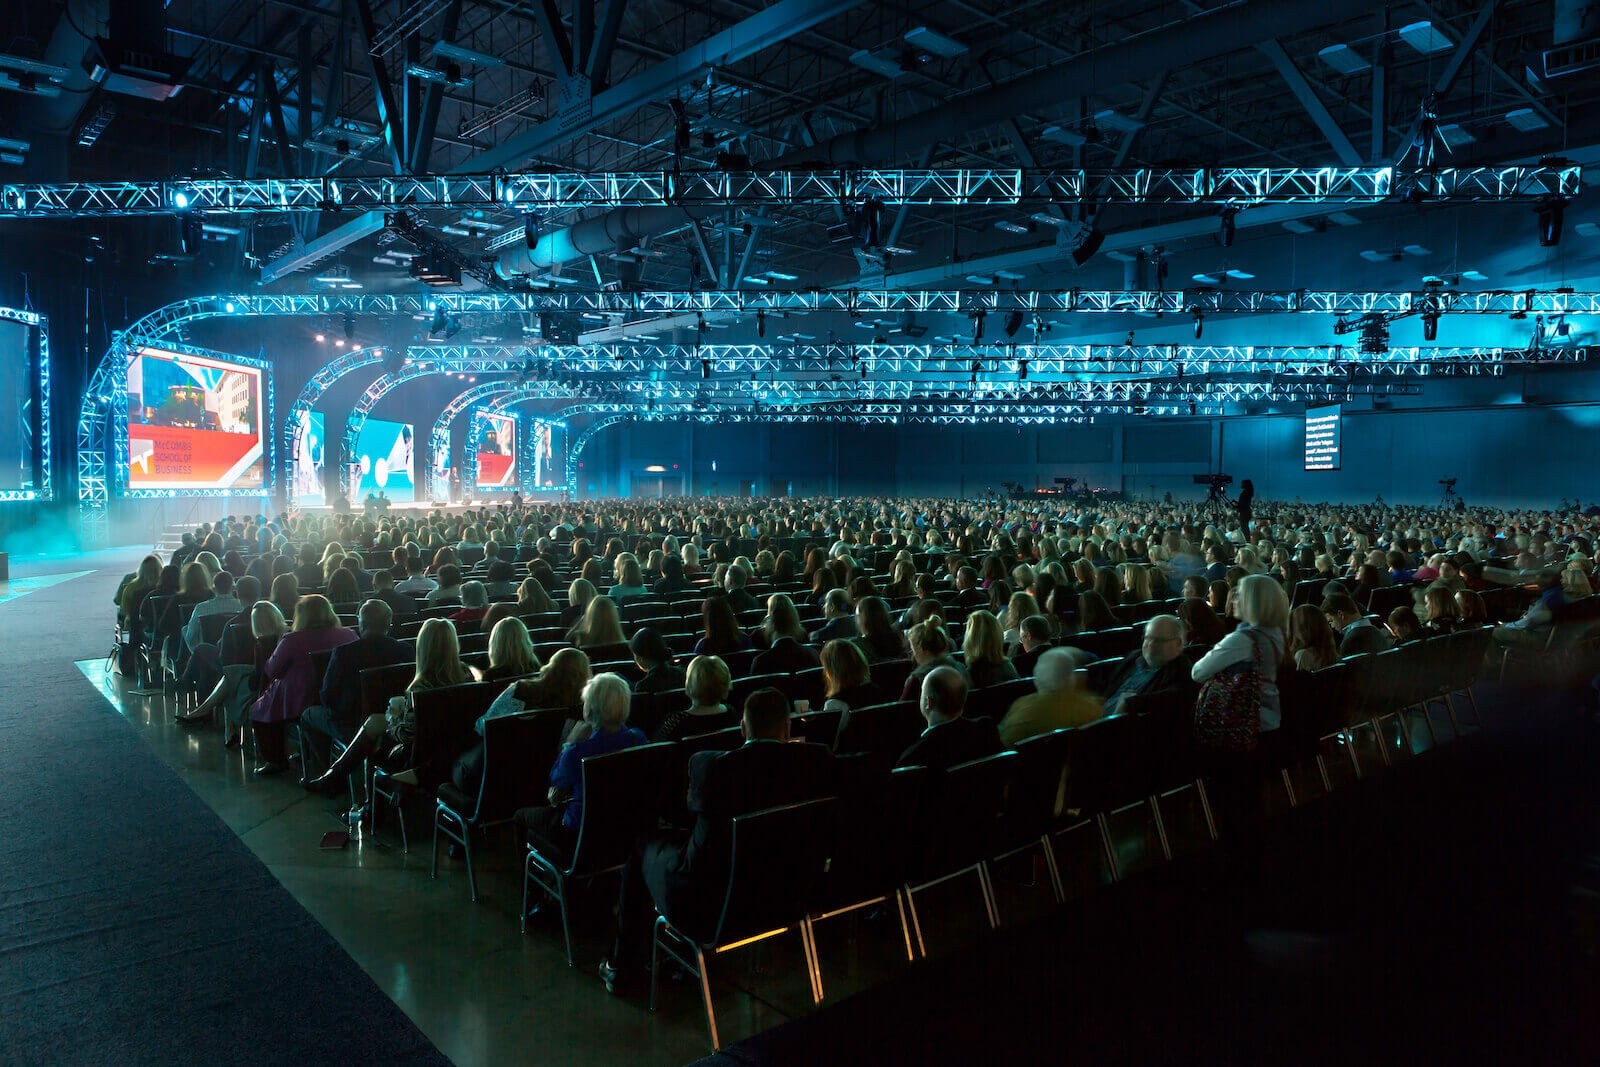 PCMA Convening Leaders invites you to plug in for four electrifying days in Nashville